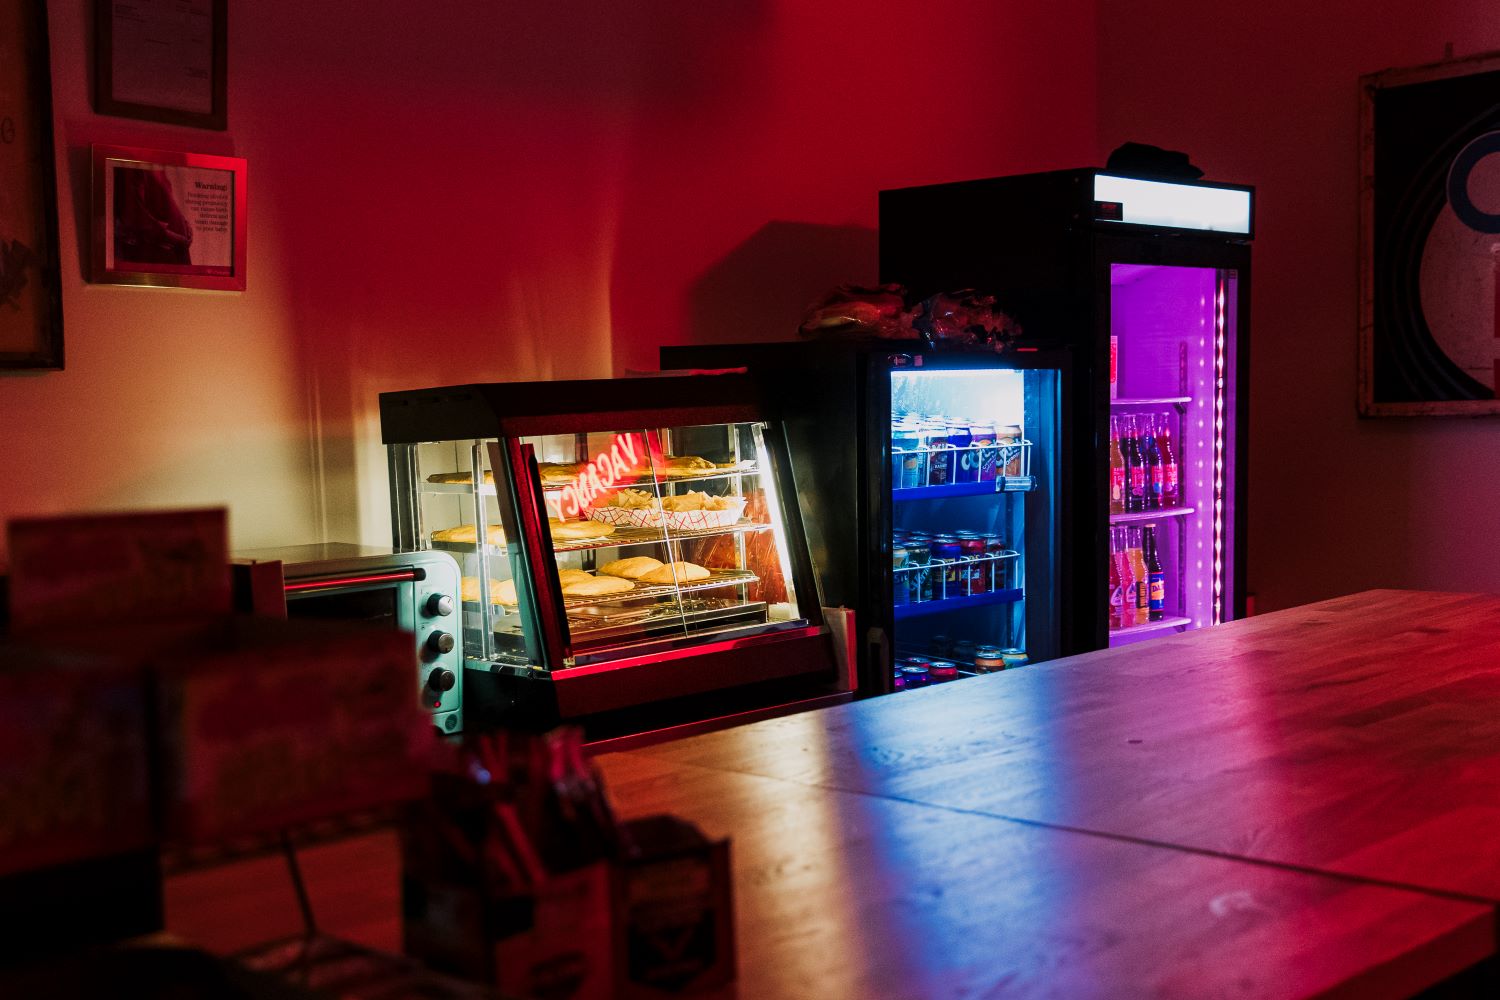 This cocktail bar disguises itself as a quiet convenience store